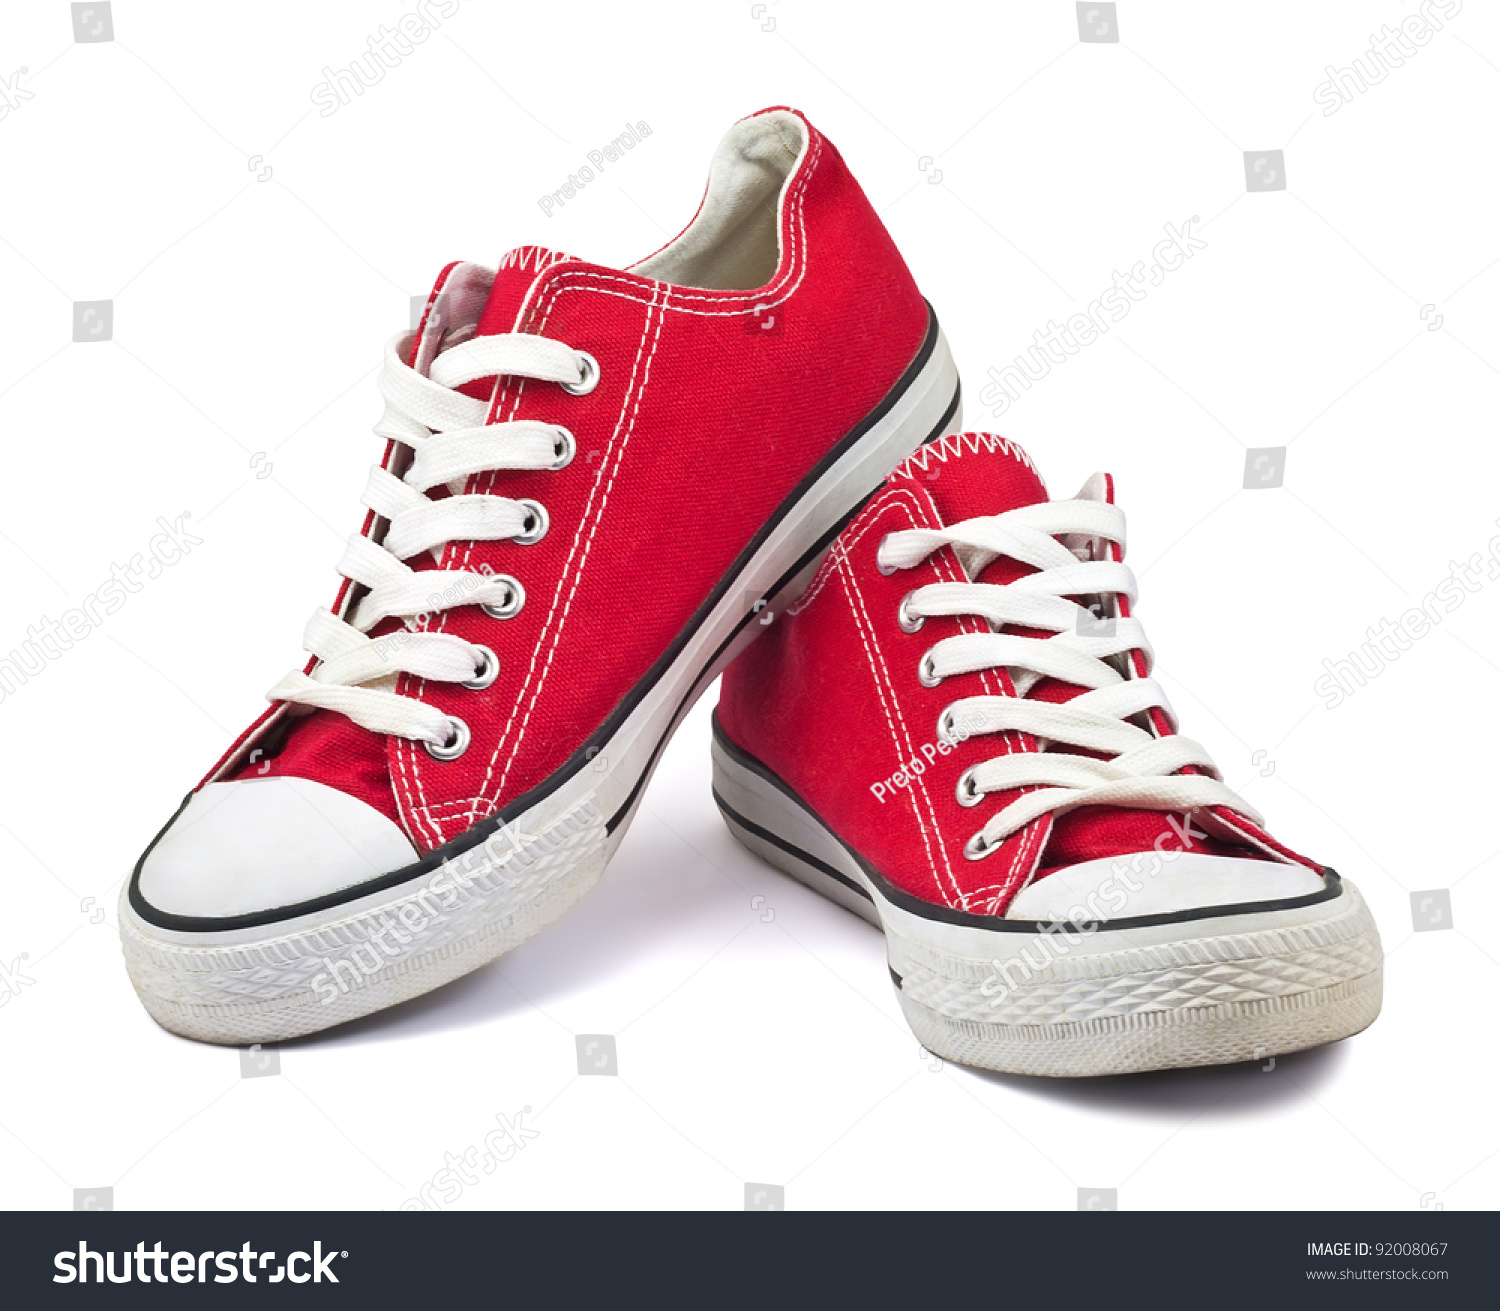 vintage red shoes on white background #92008067